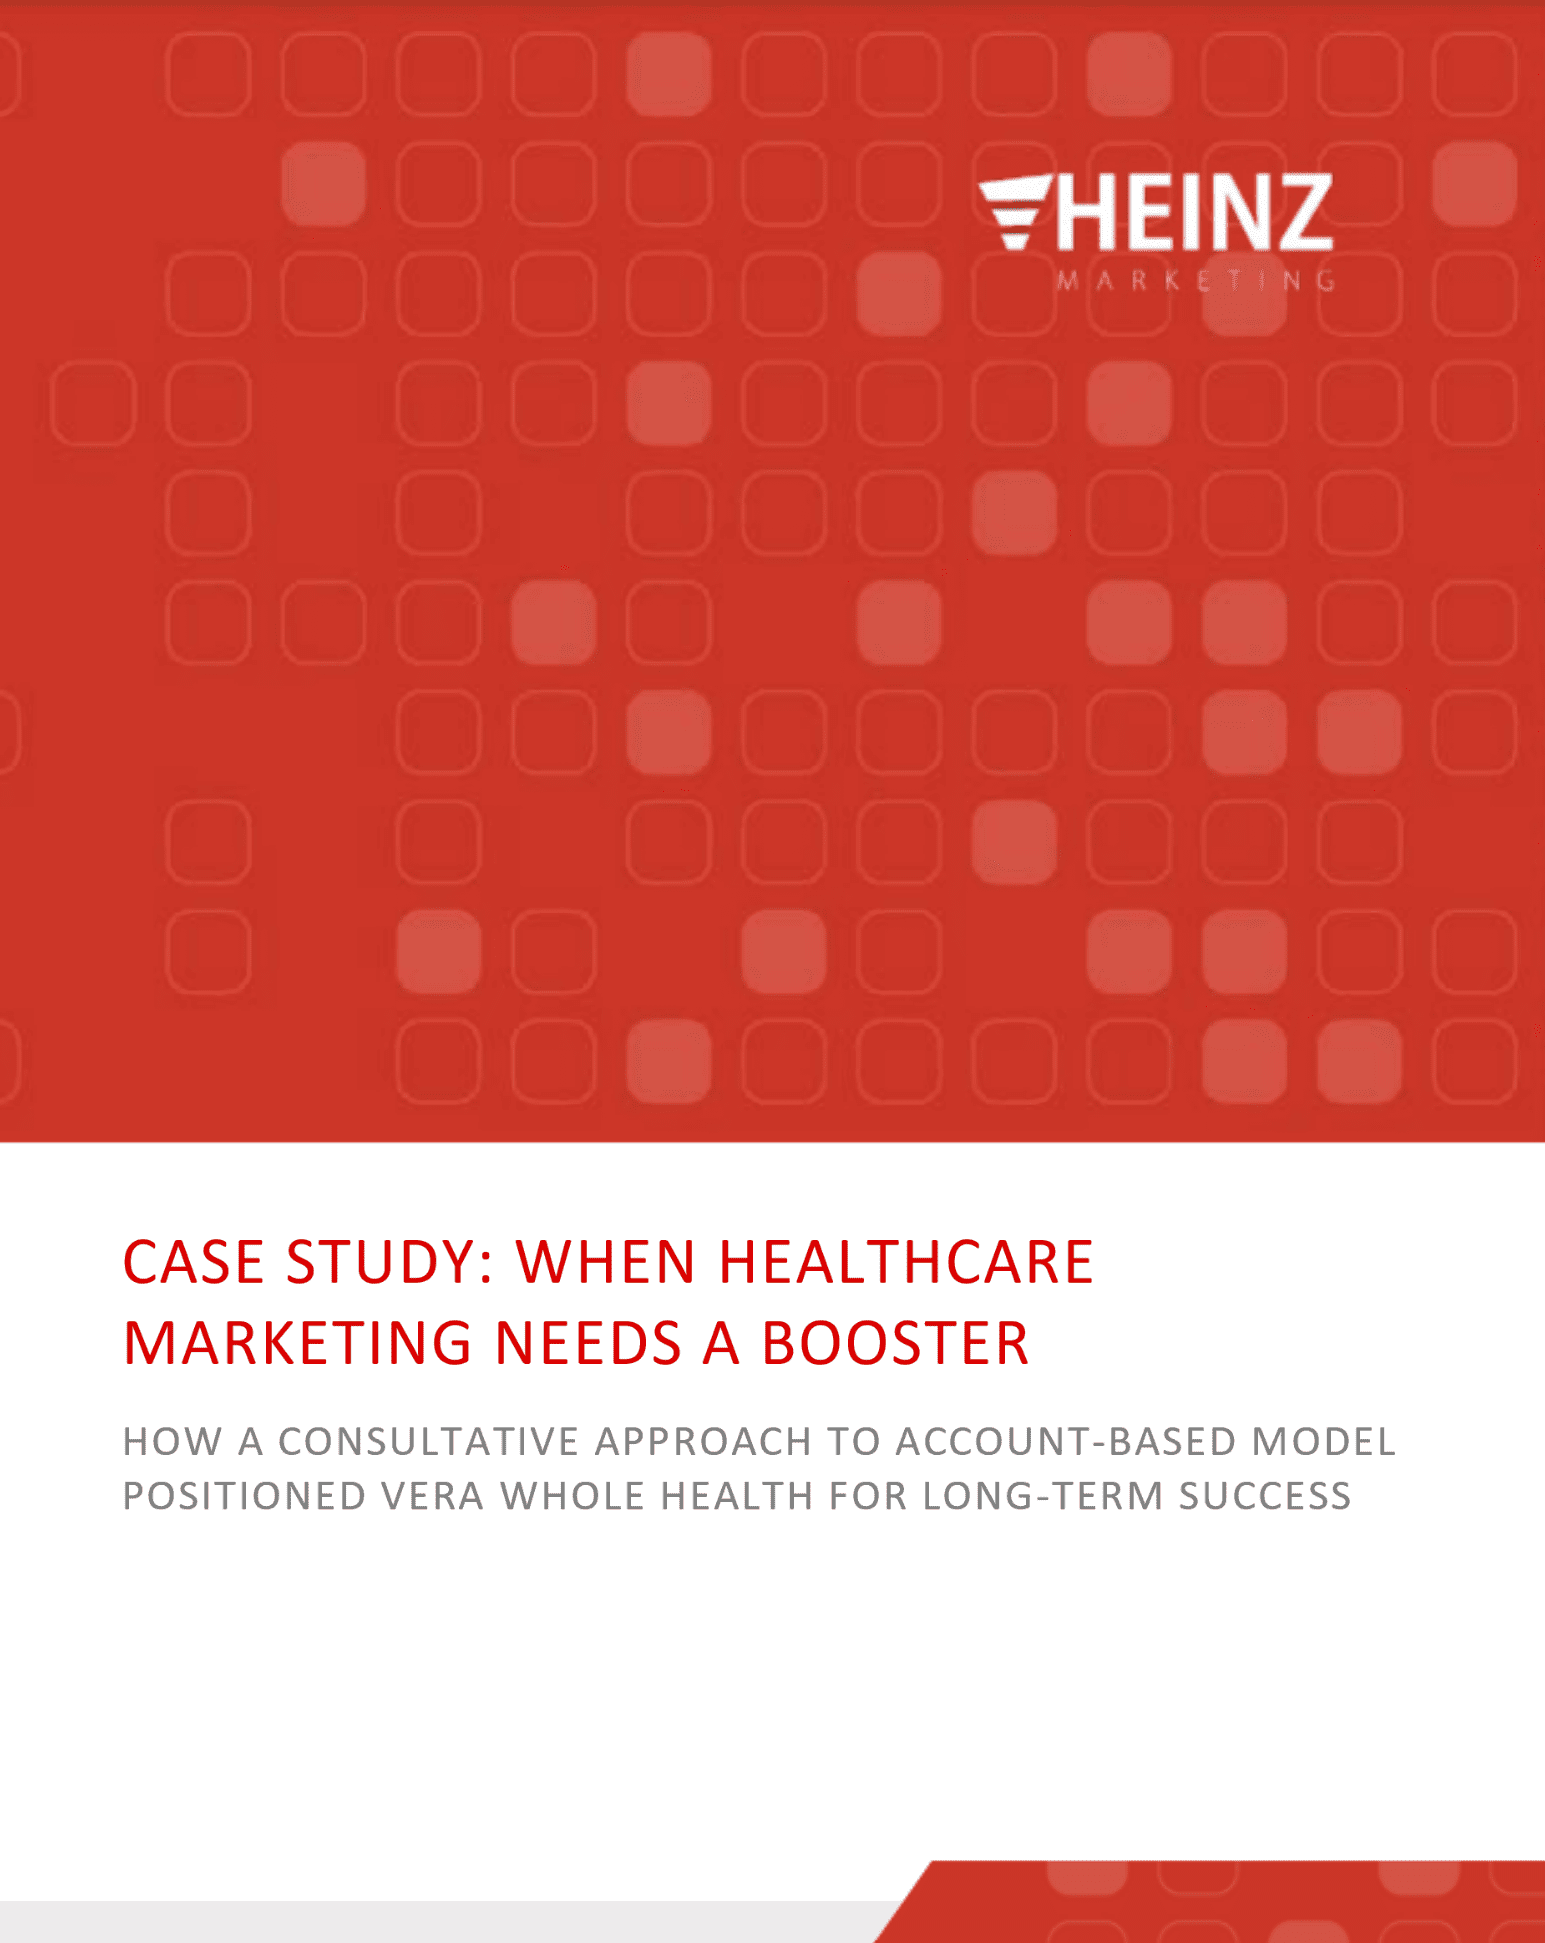 Case Study: When Healthcare Marketing Needs a Booster